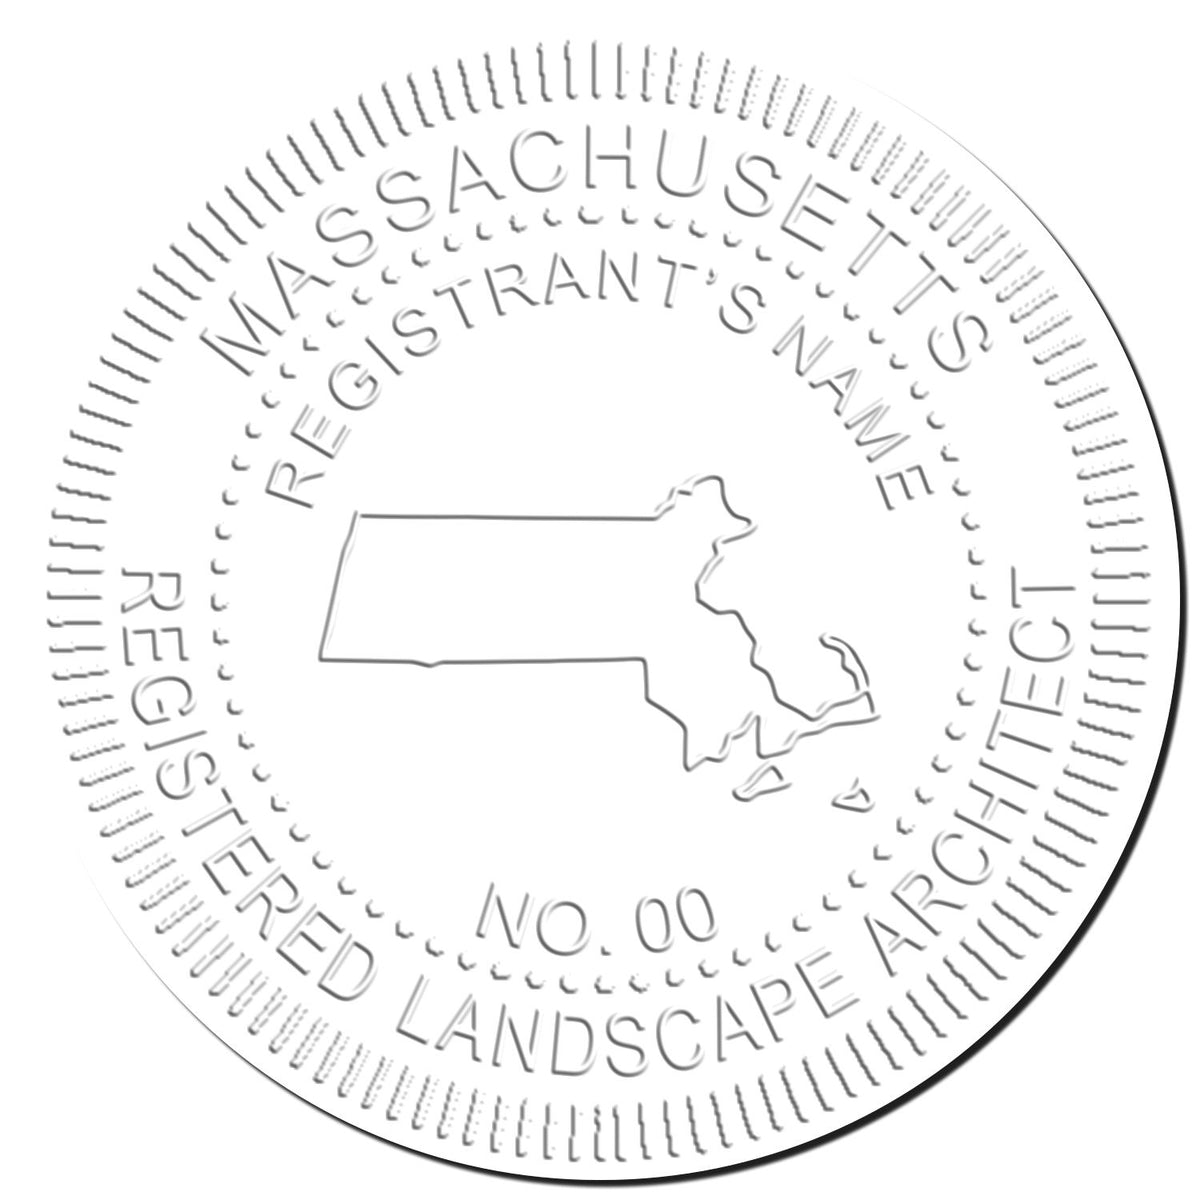 This paper is stamped with a sample imprint of the Gift Massachusetts Landscape Architect Seal, signifying its quality and reliability.